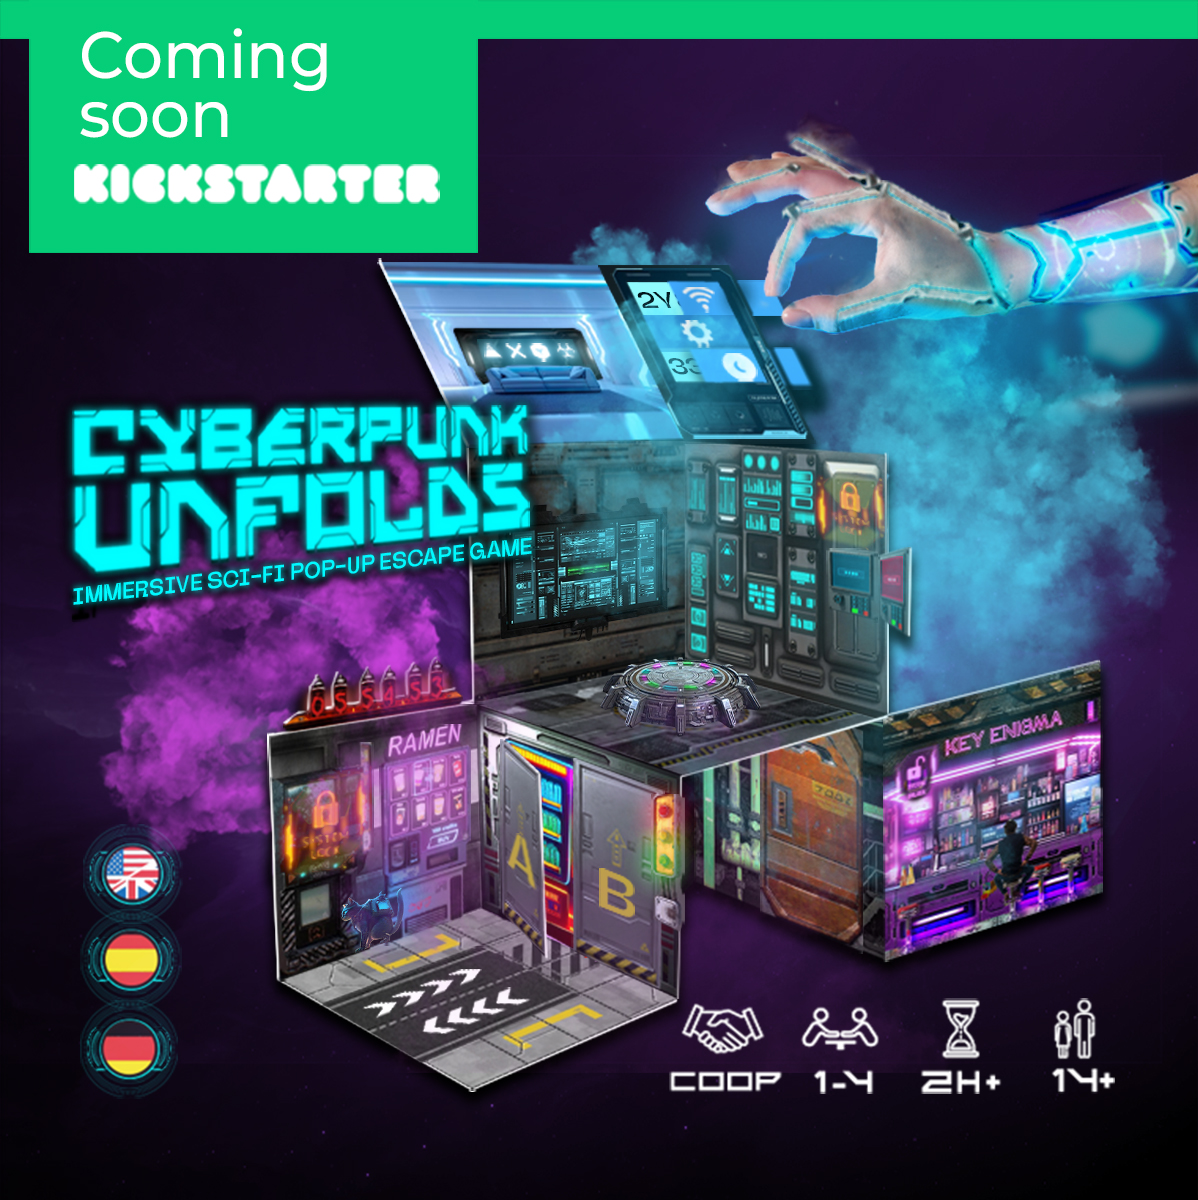 The first #cyberpunk #Popup #escape #boardgame arrives on #Kickstarter Unfold a futuristic city and solve all the #puzzles to overthrow this cyberpunk dystopia. Sign up now with the link in our bio to be the first. kickstarter.com/projects/keyen…